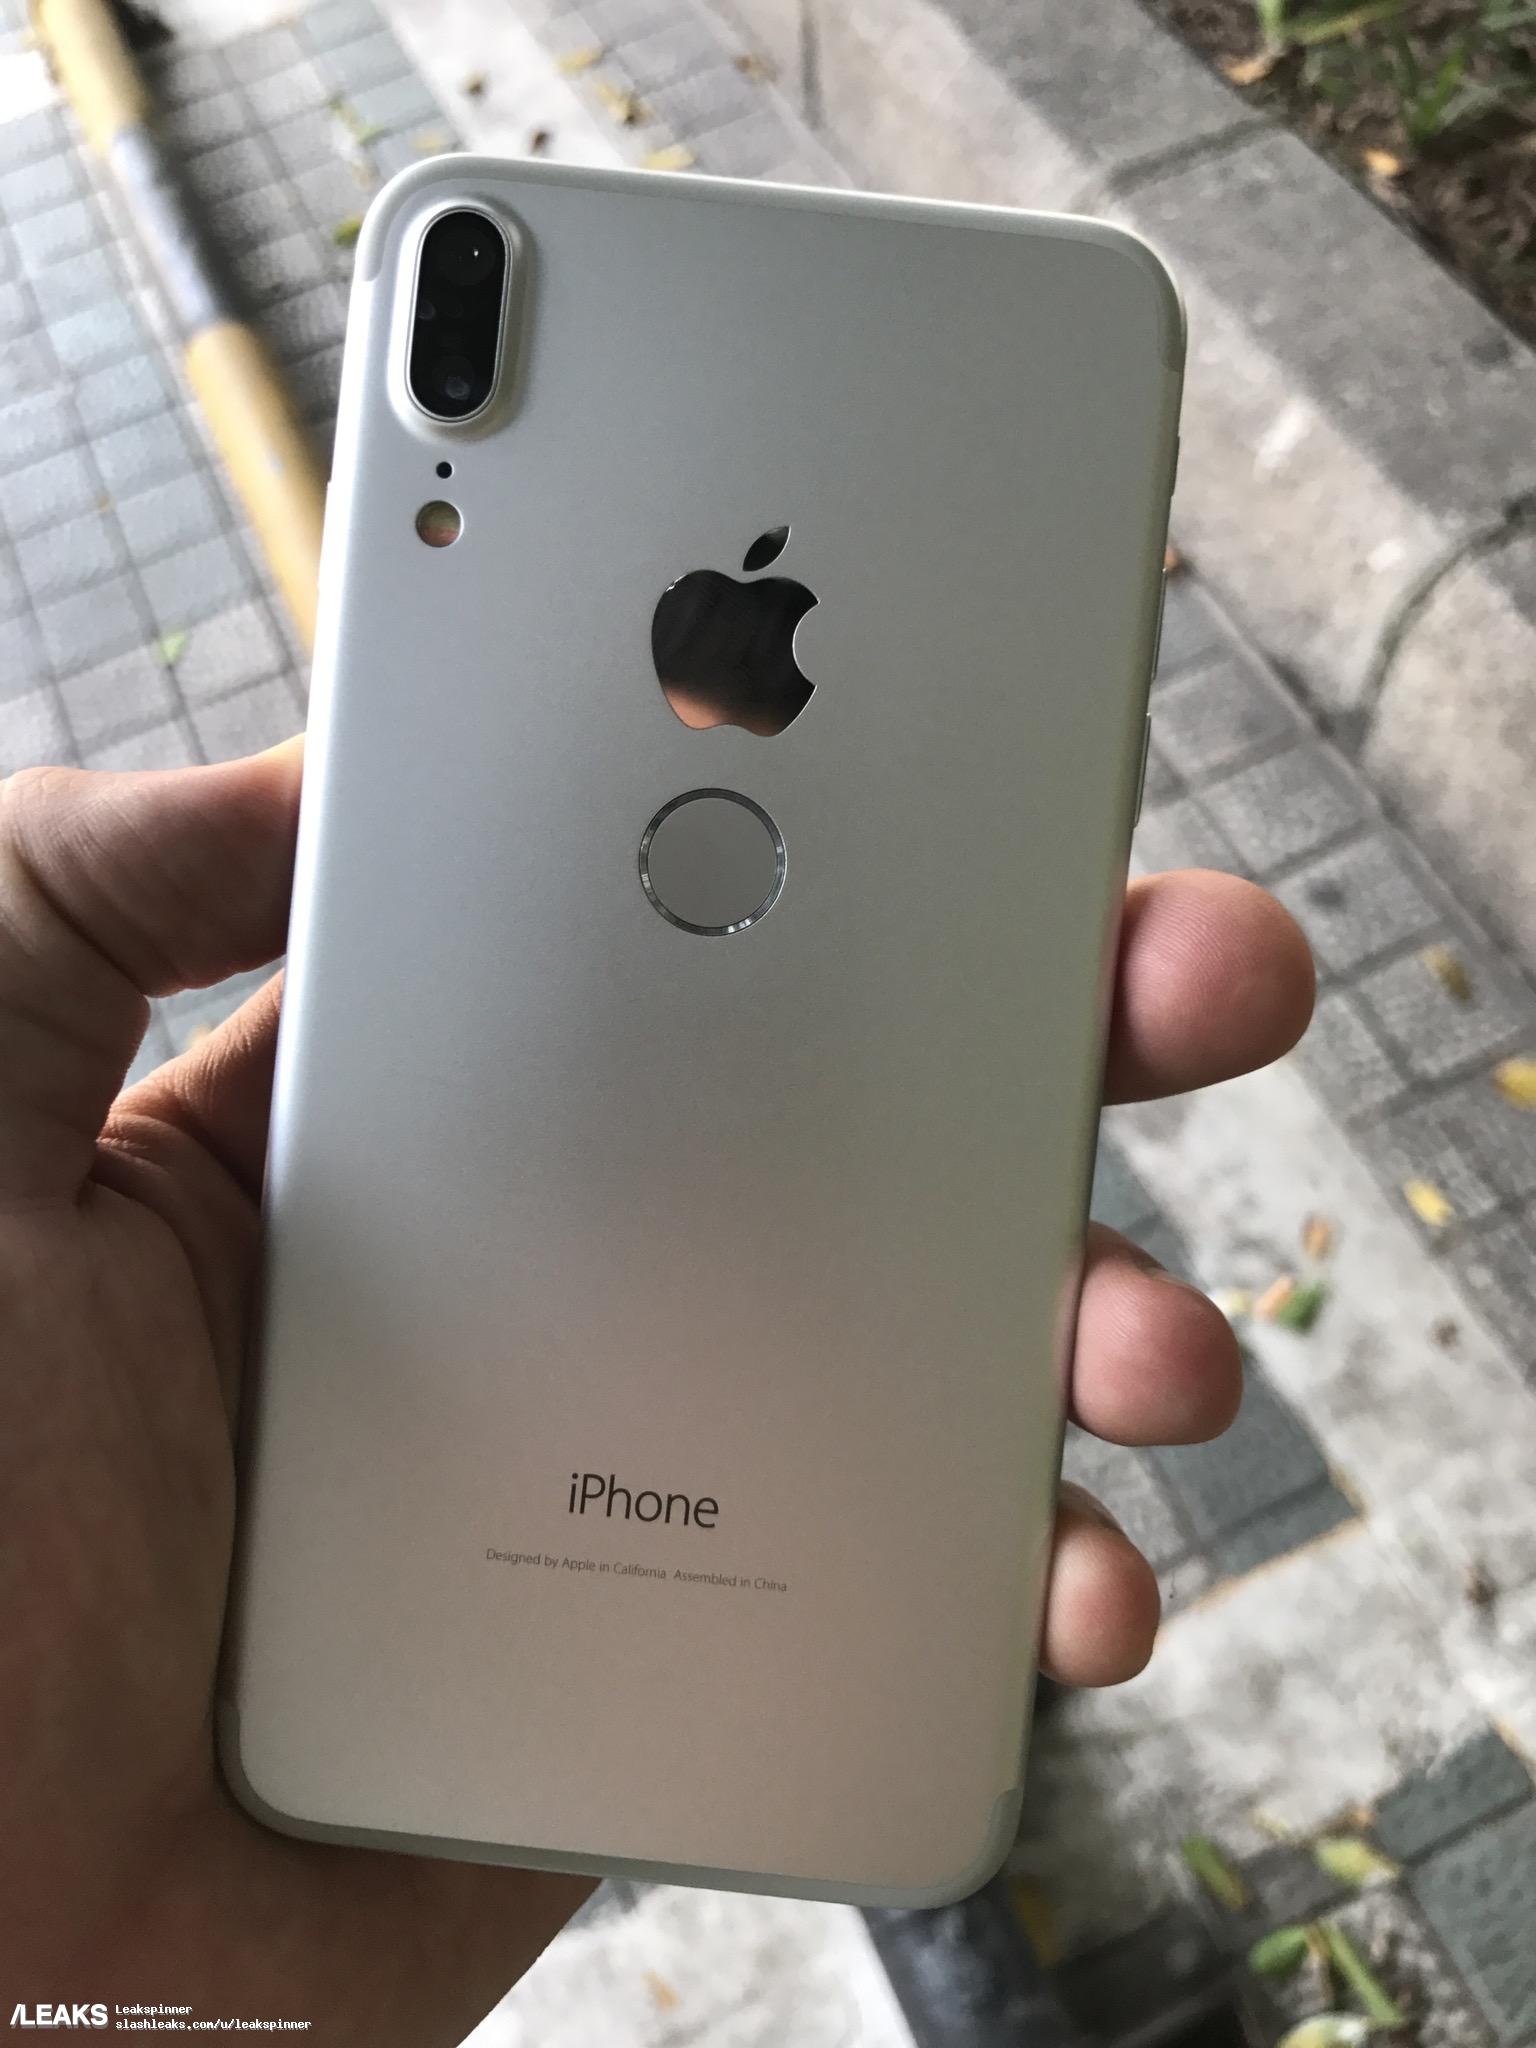 Hands-on iPhone 8 dummy with rear-mounted Touch ID sensor [UPDATED